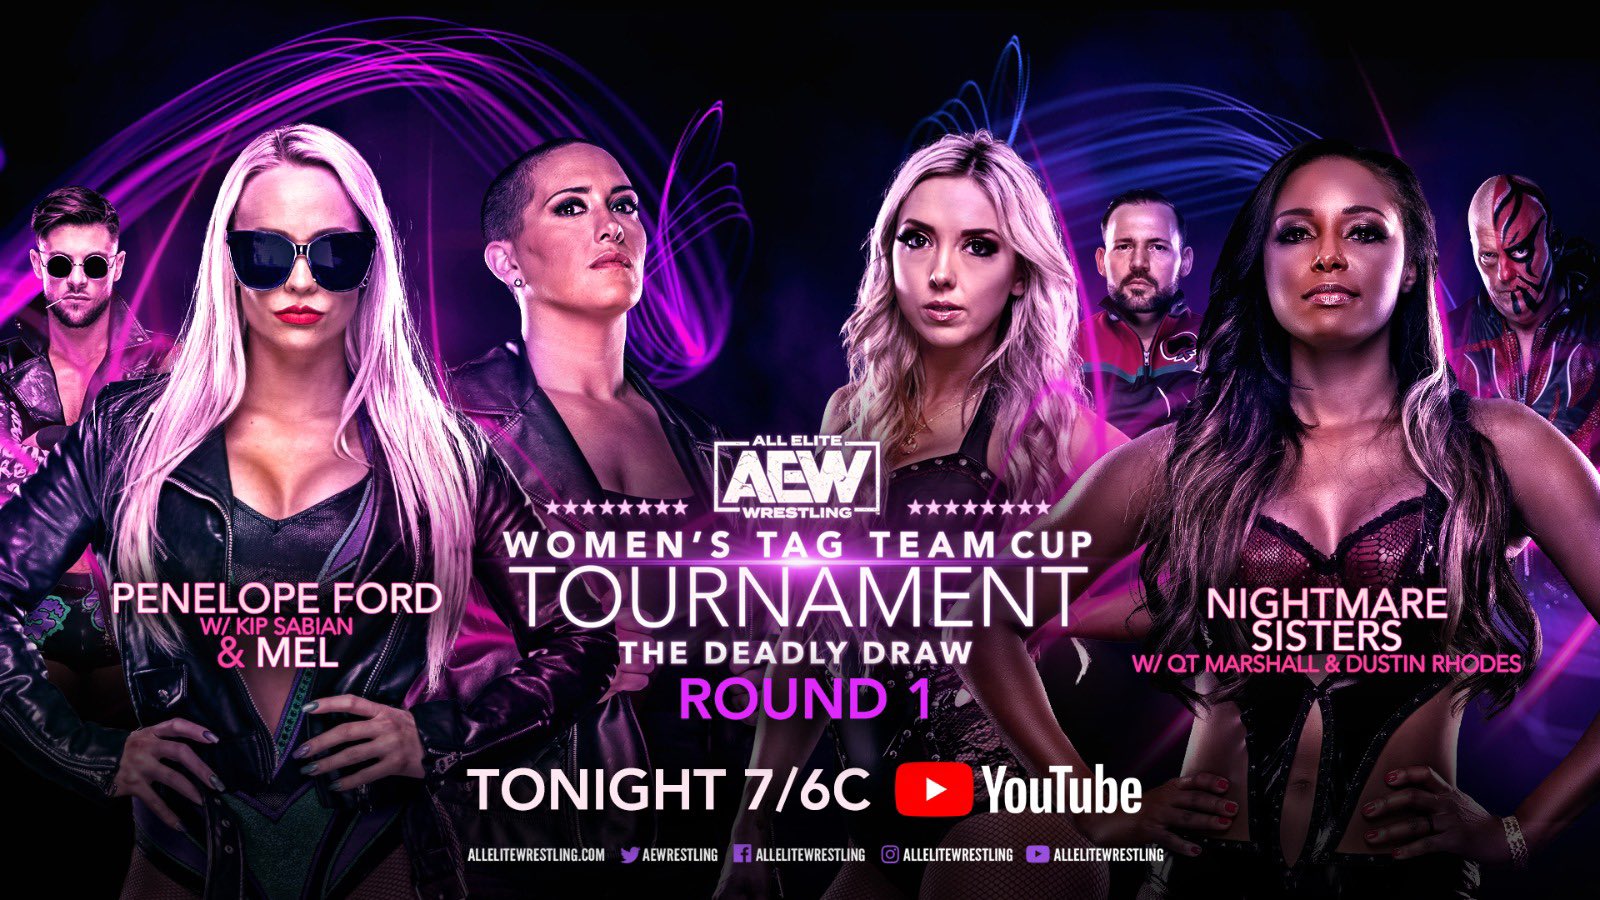 AEW Women's Tag Team Cup Tournament.